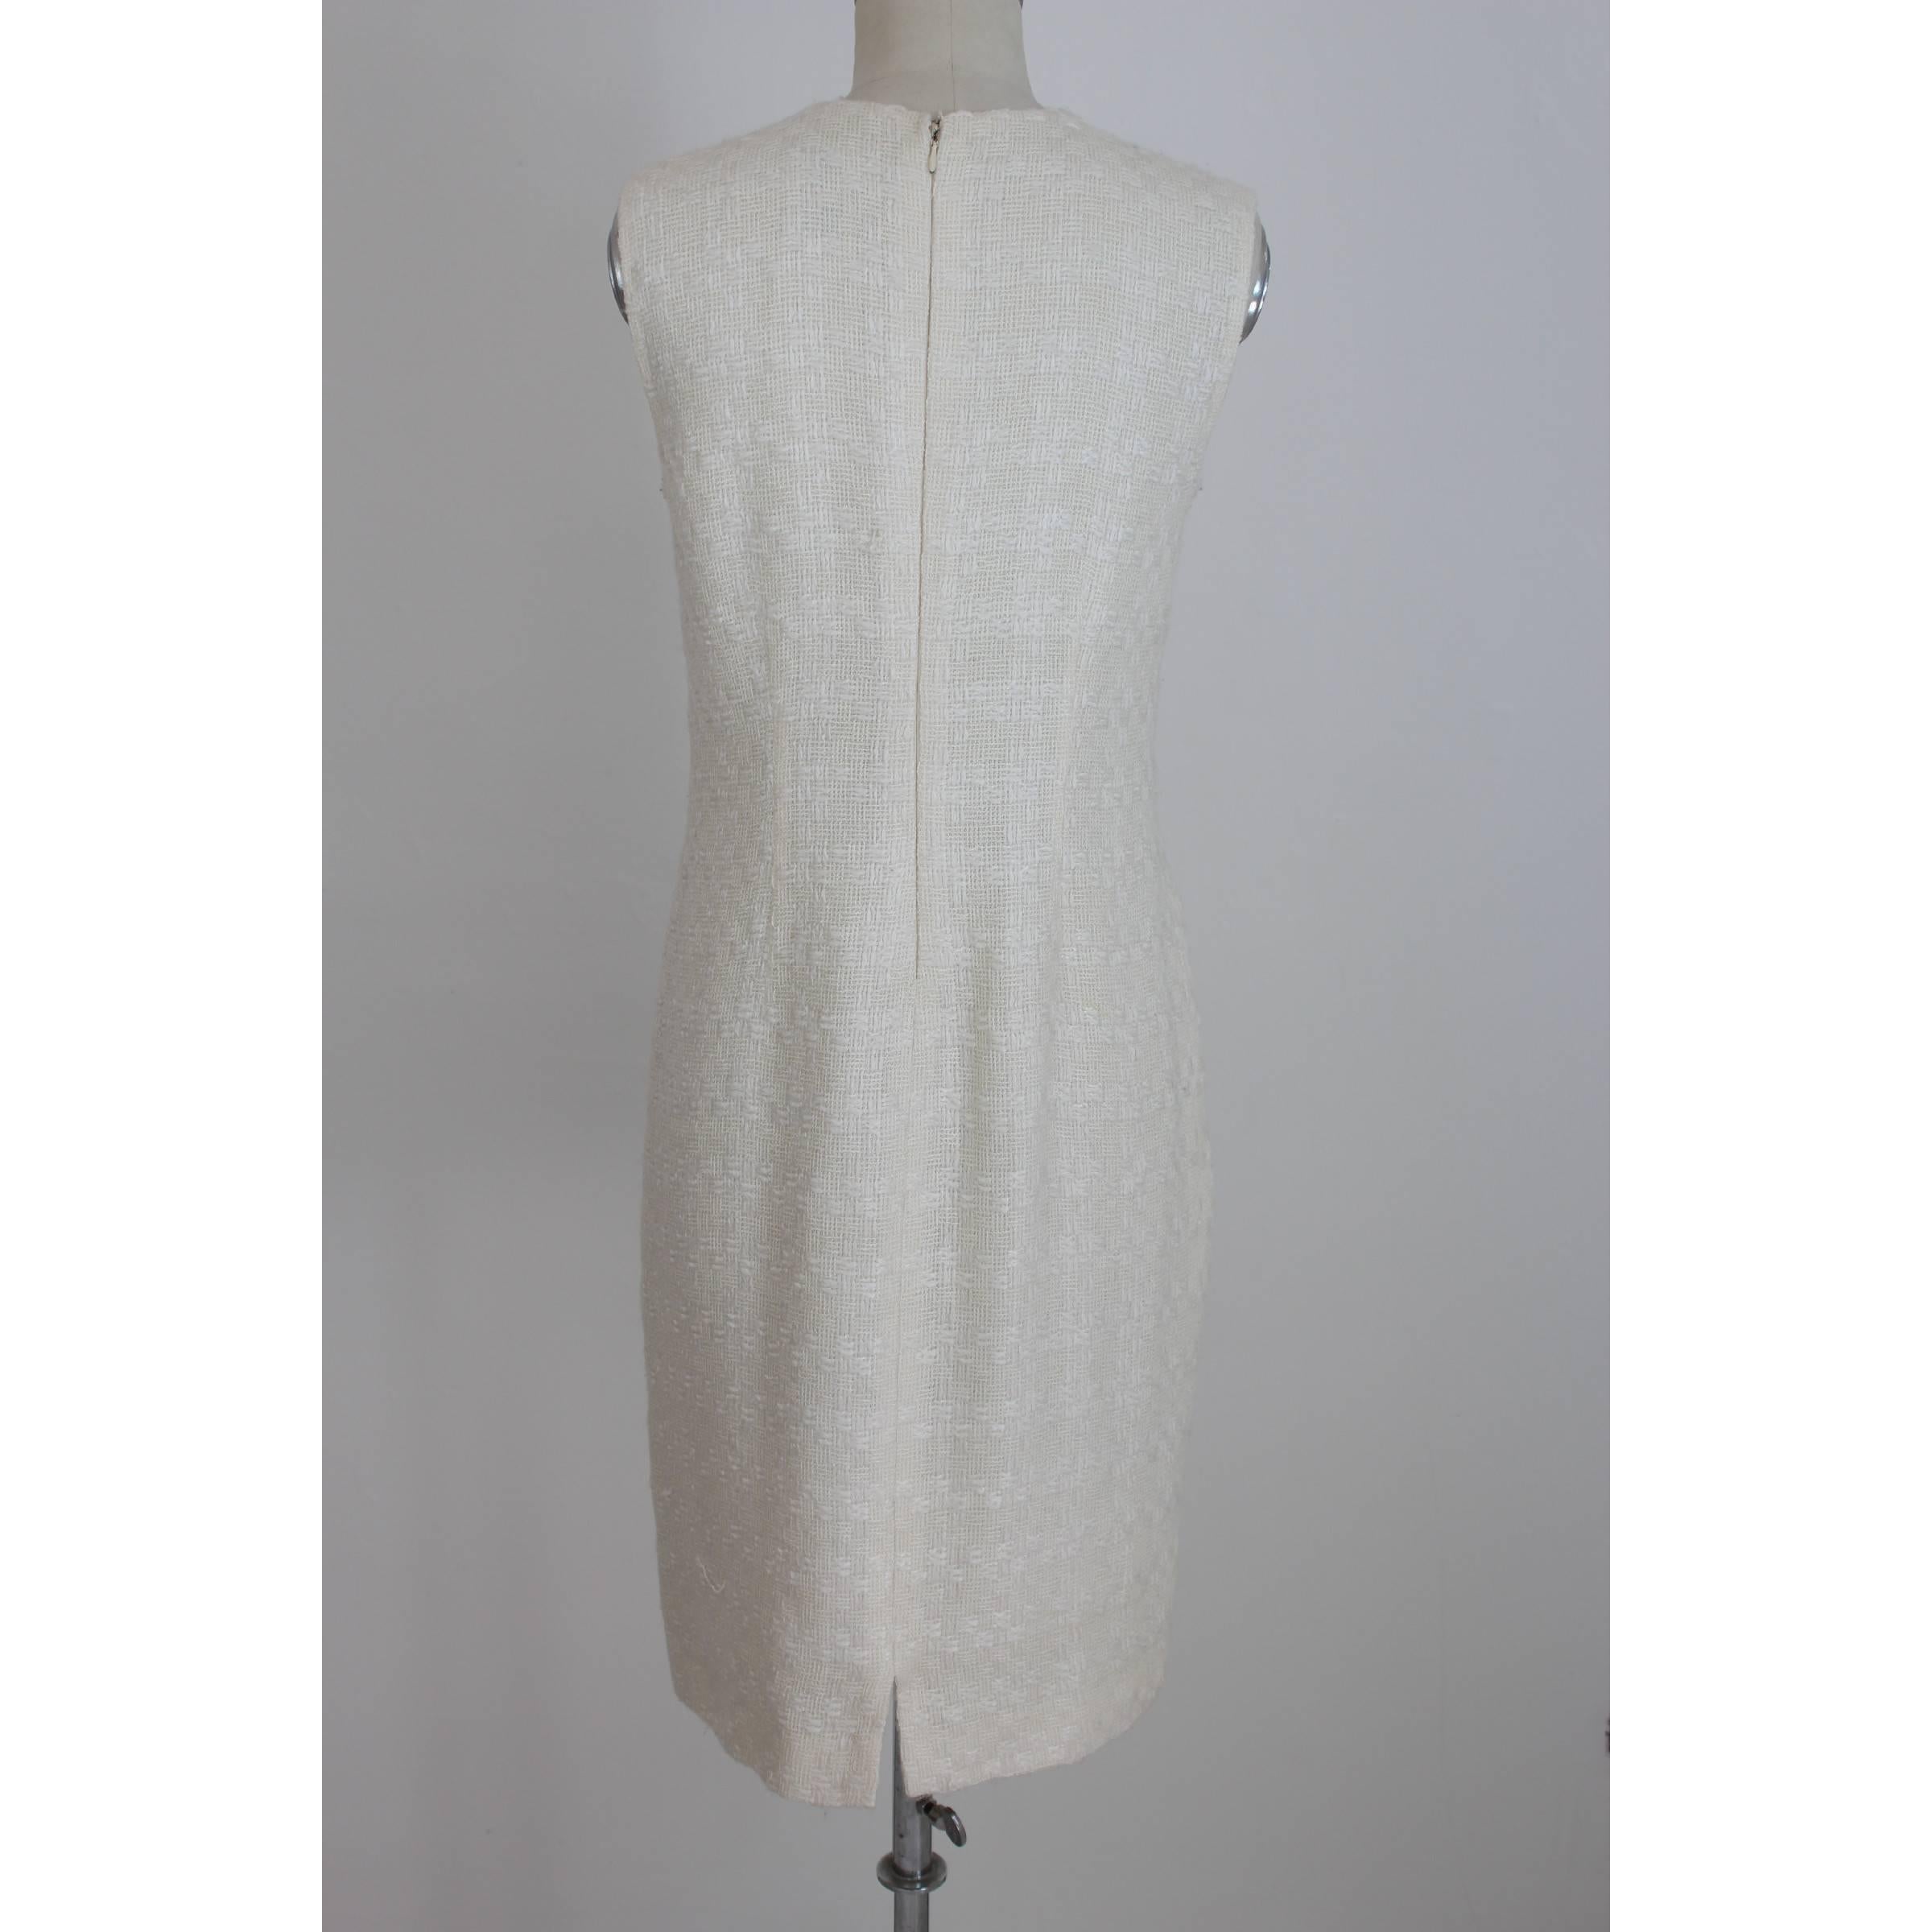 Valentino dress, ivory color, 100% wool. Sheath dress, sleeveless crew-neck dress. Length on the knee. Zip closure along the back. Made in Italy. Excellent vintage condiments.

Size 44 It 10 Us 12 Uk

Shoulders: 44 cm
Chest / bust: 48 cm
Sleeves: